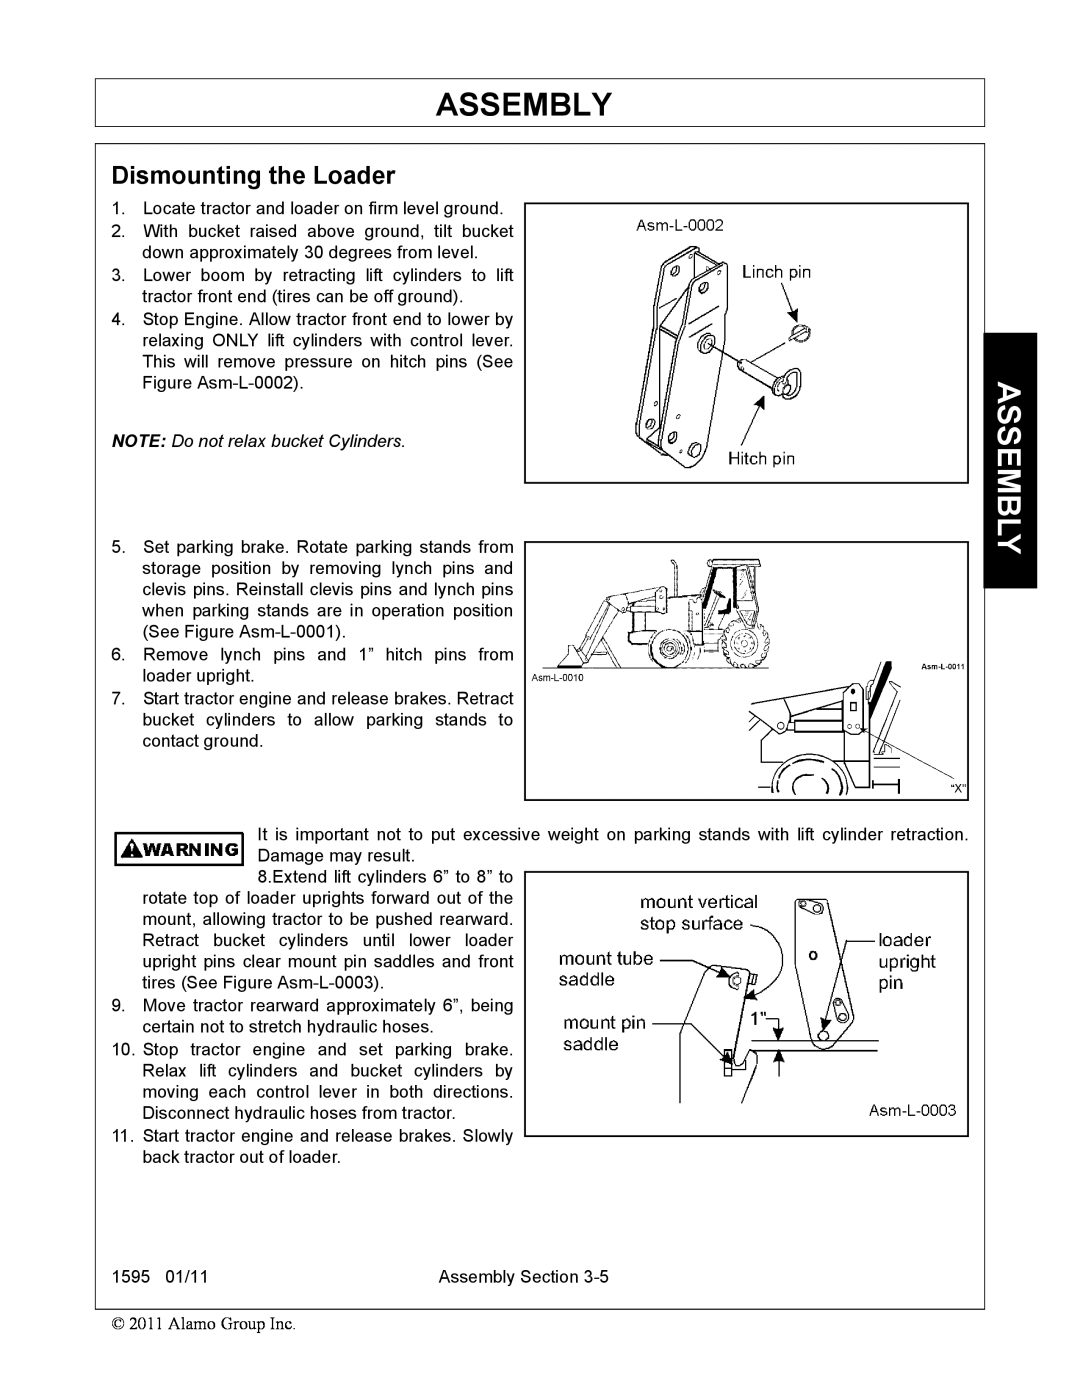 Alamo 1595 manual Assembly, Dismounting the Loader, NOTE Do not relax bucket Cylinders 